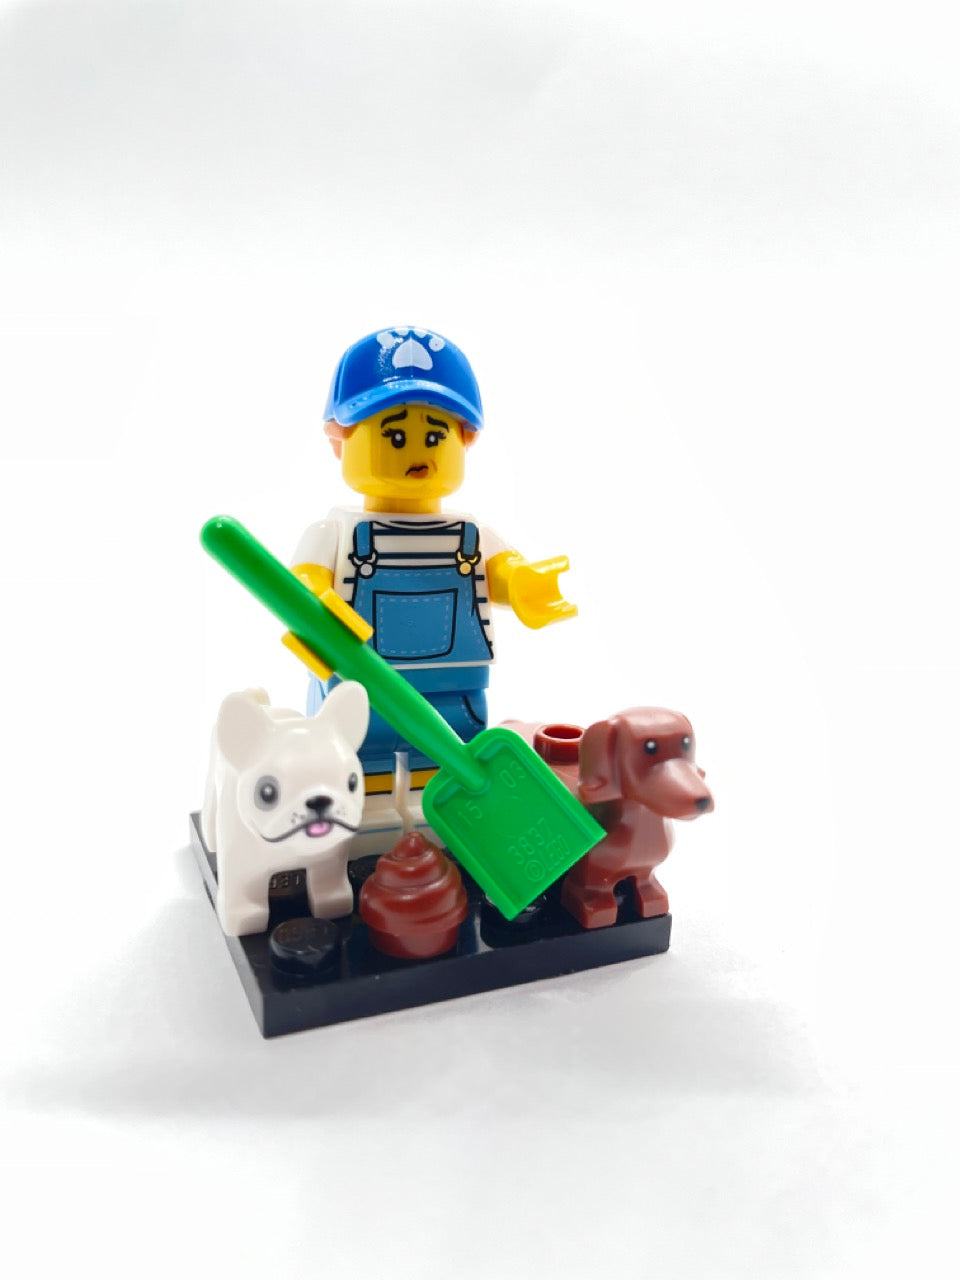 Dog Sitter, Series 19 Collectable Minifigure, col350